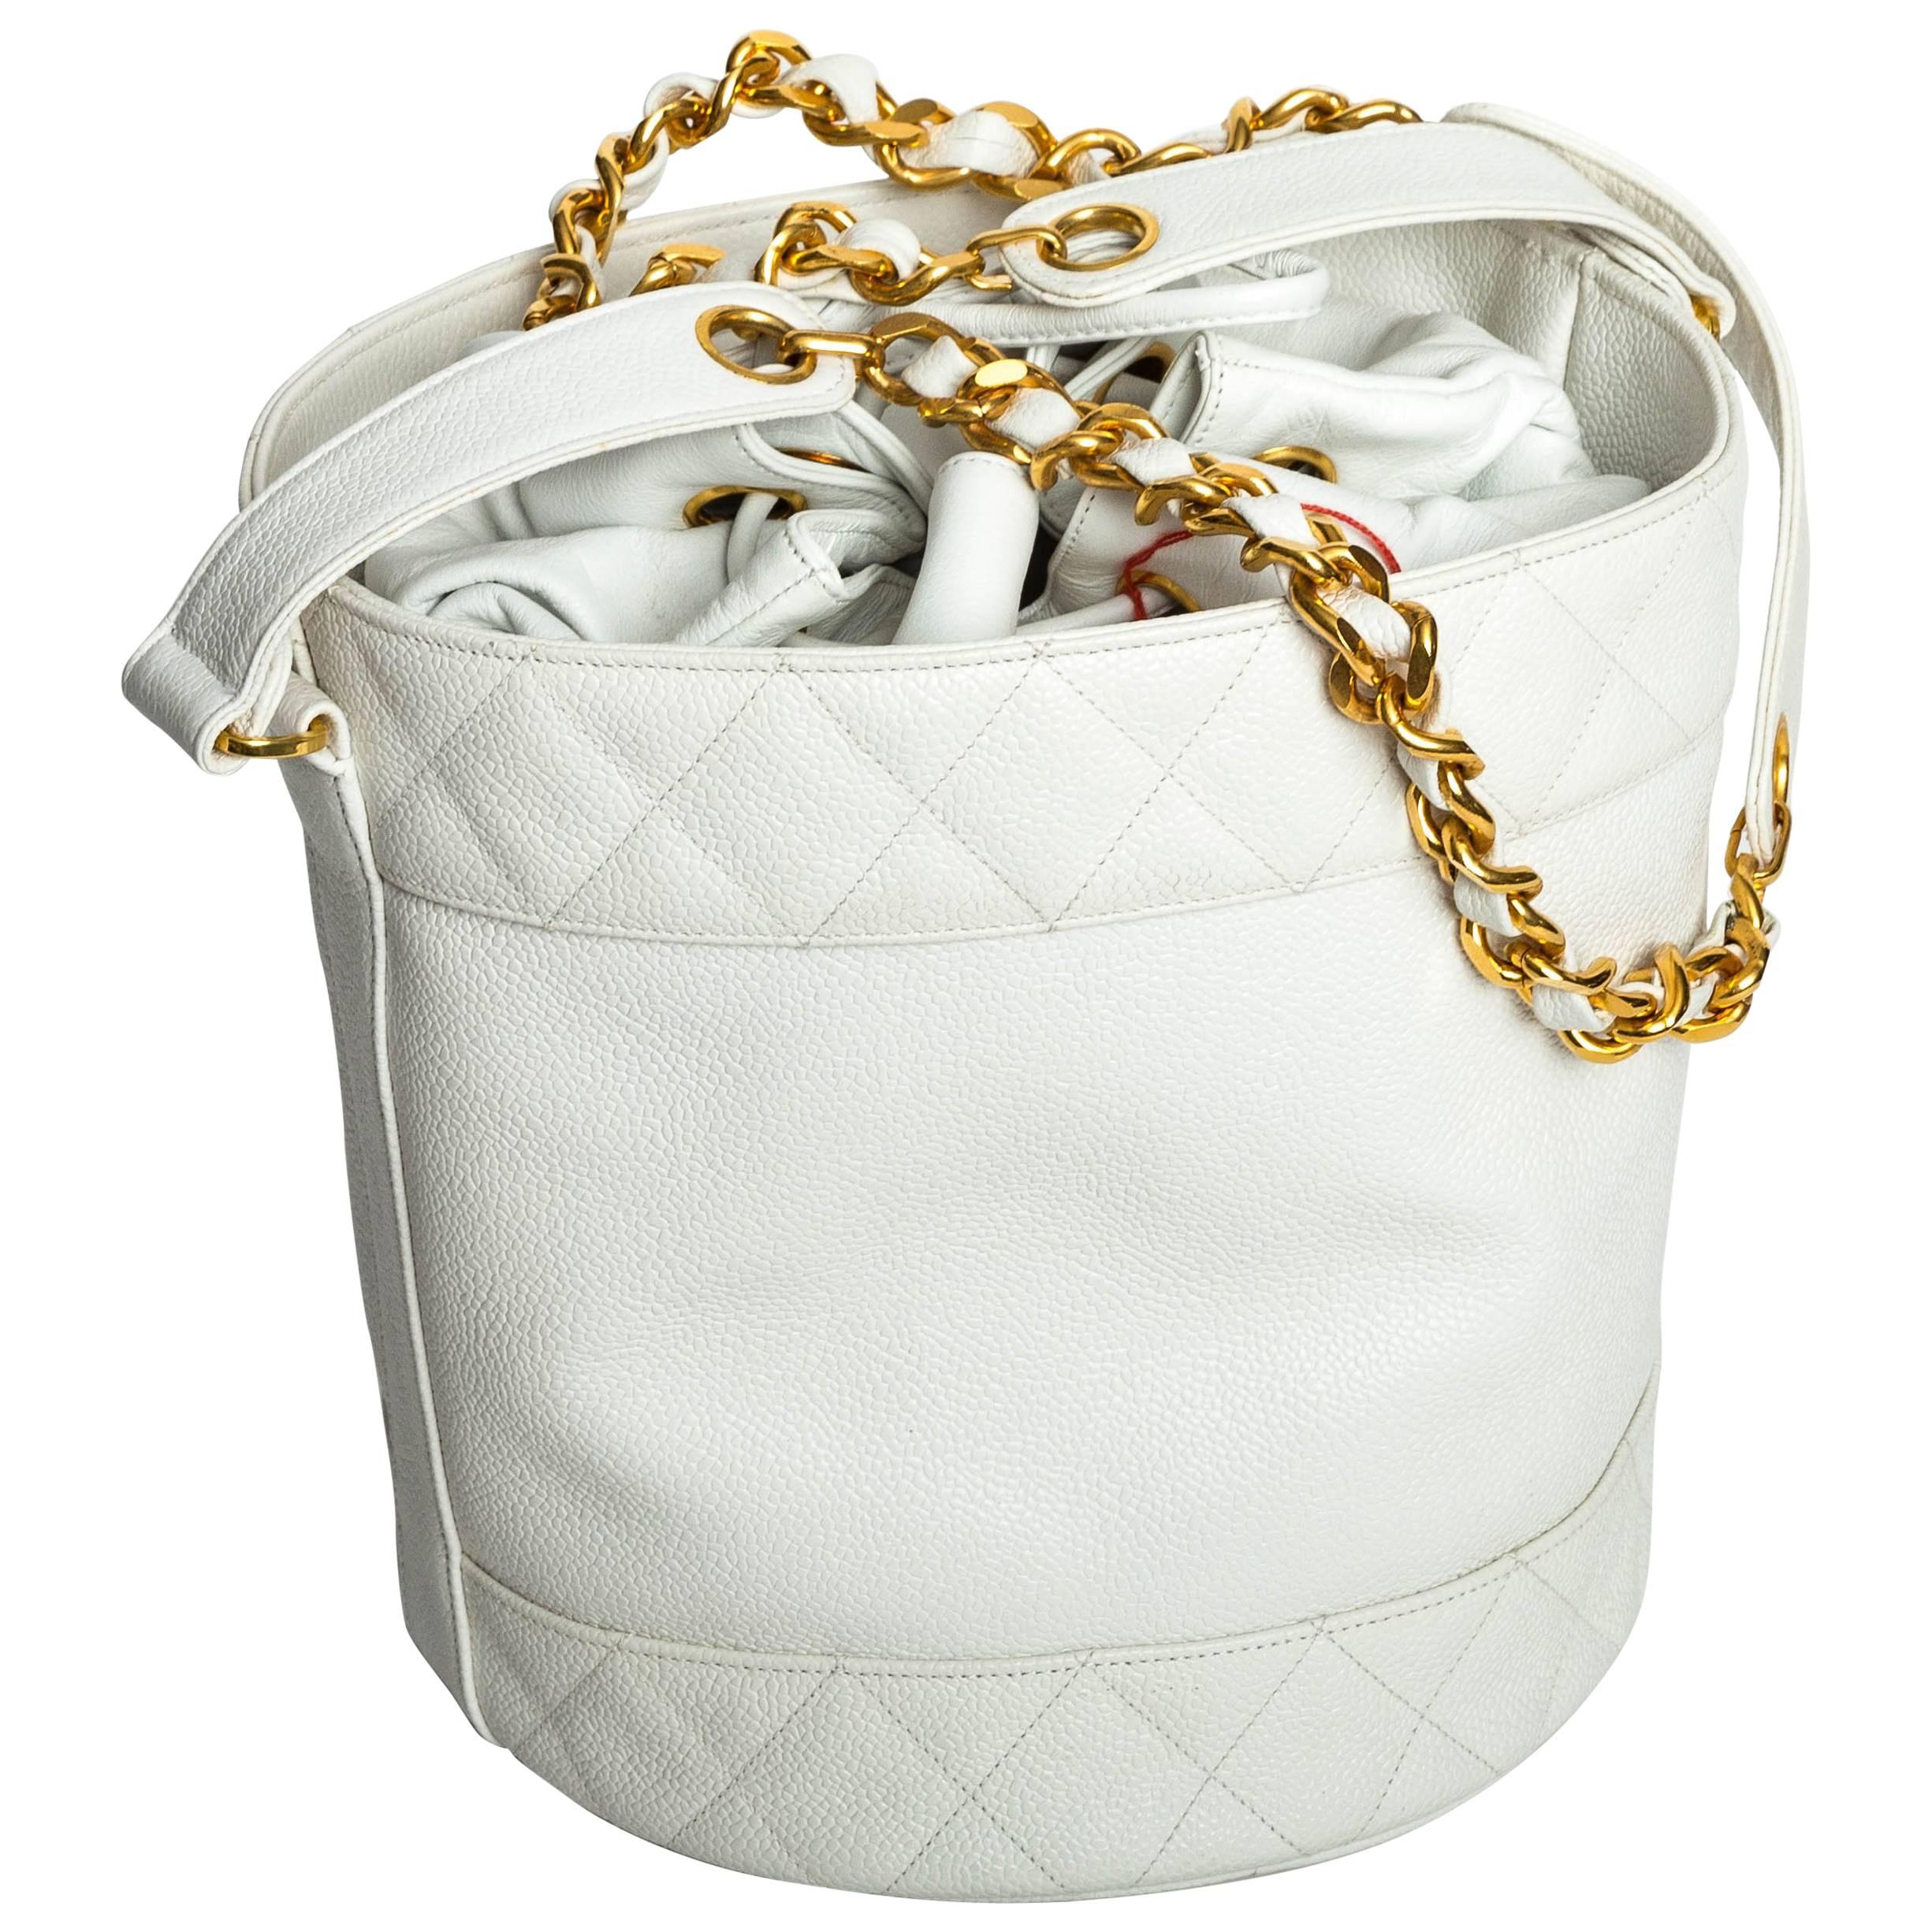 Chanel White Caviar Drawstring Bucket Bag with Interior Pouch and Gold Hardware 